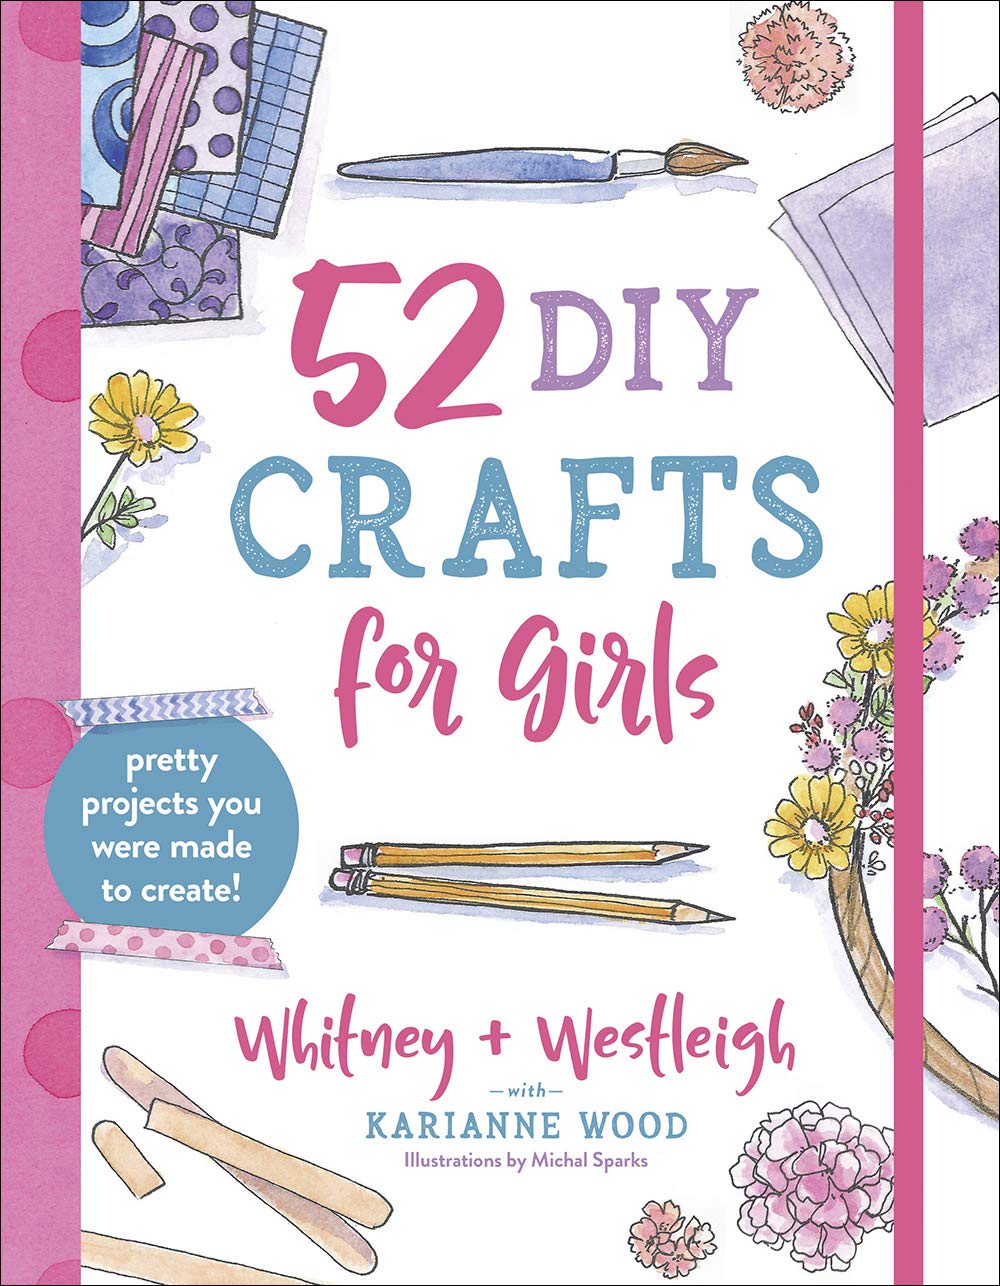 52 DIY crafts for girls - Pretty projects you were made to create